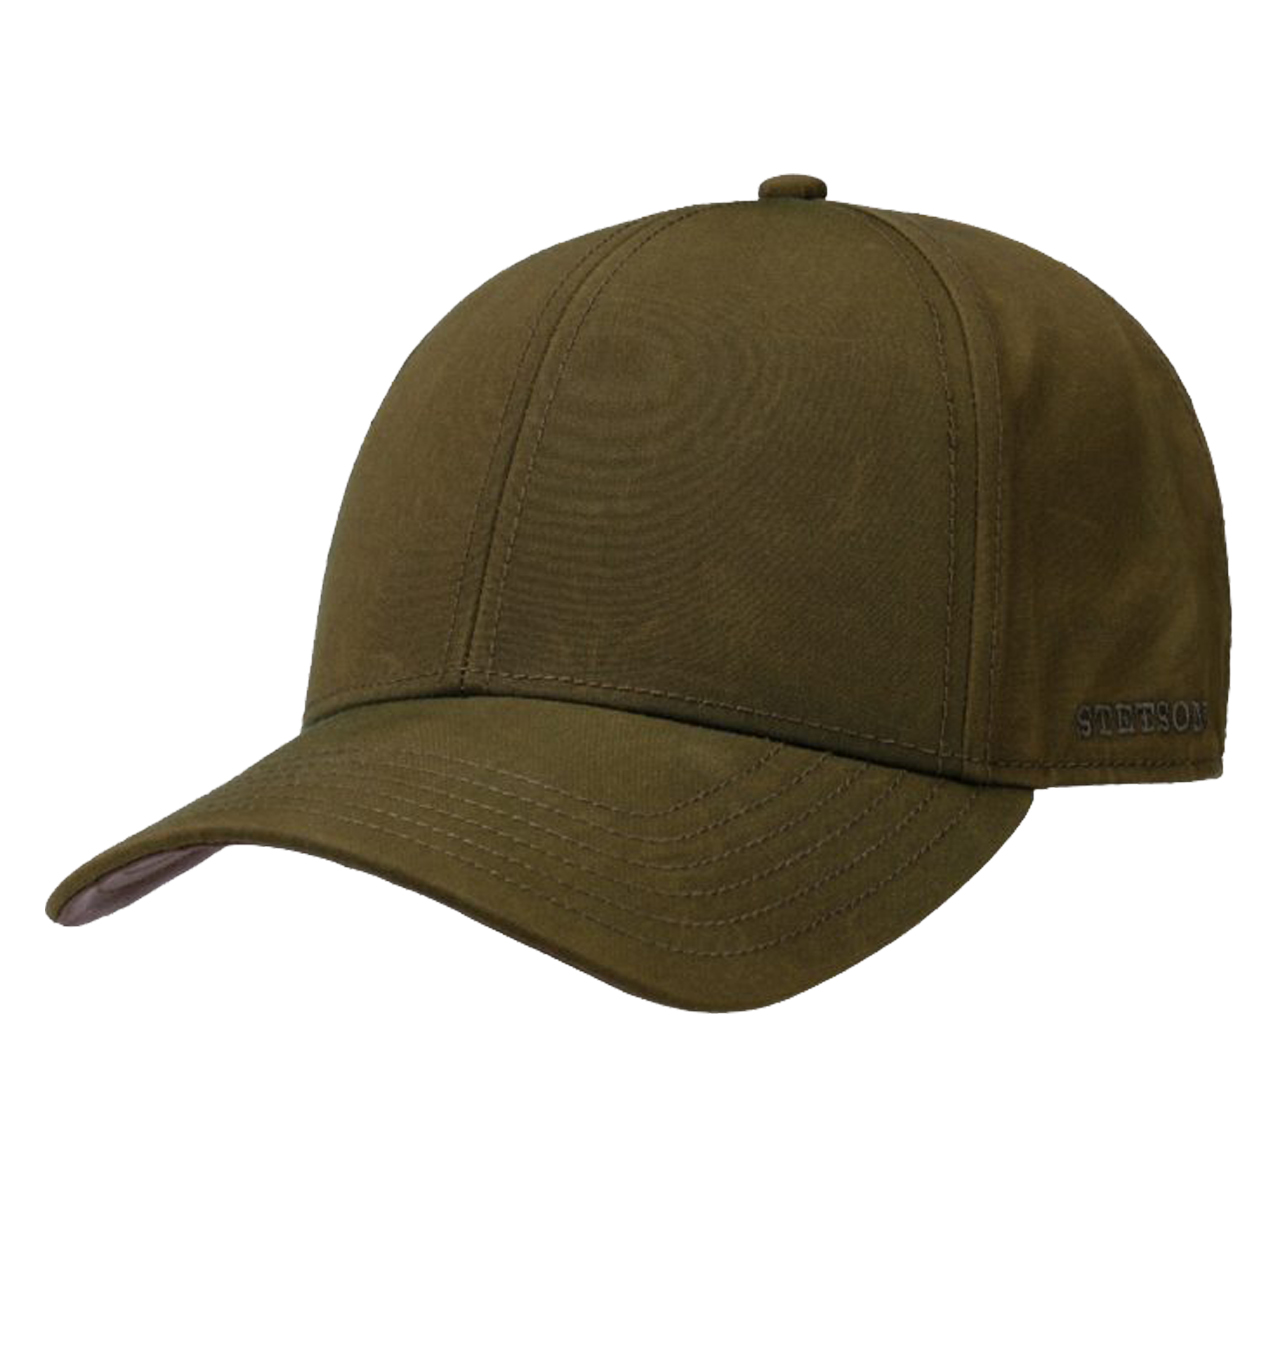 Stetson---Waxed-Cotton-Cap-With-UV-Protection---Olive1